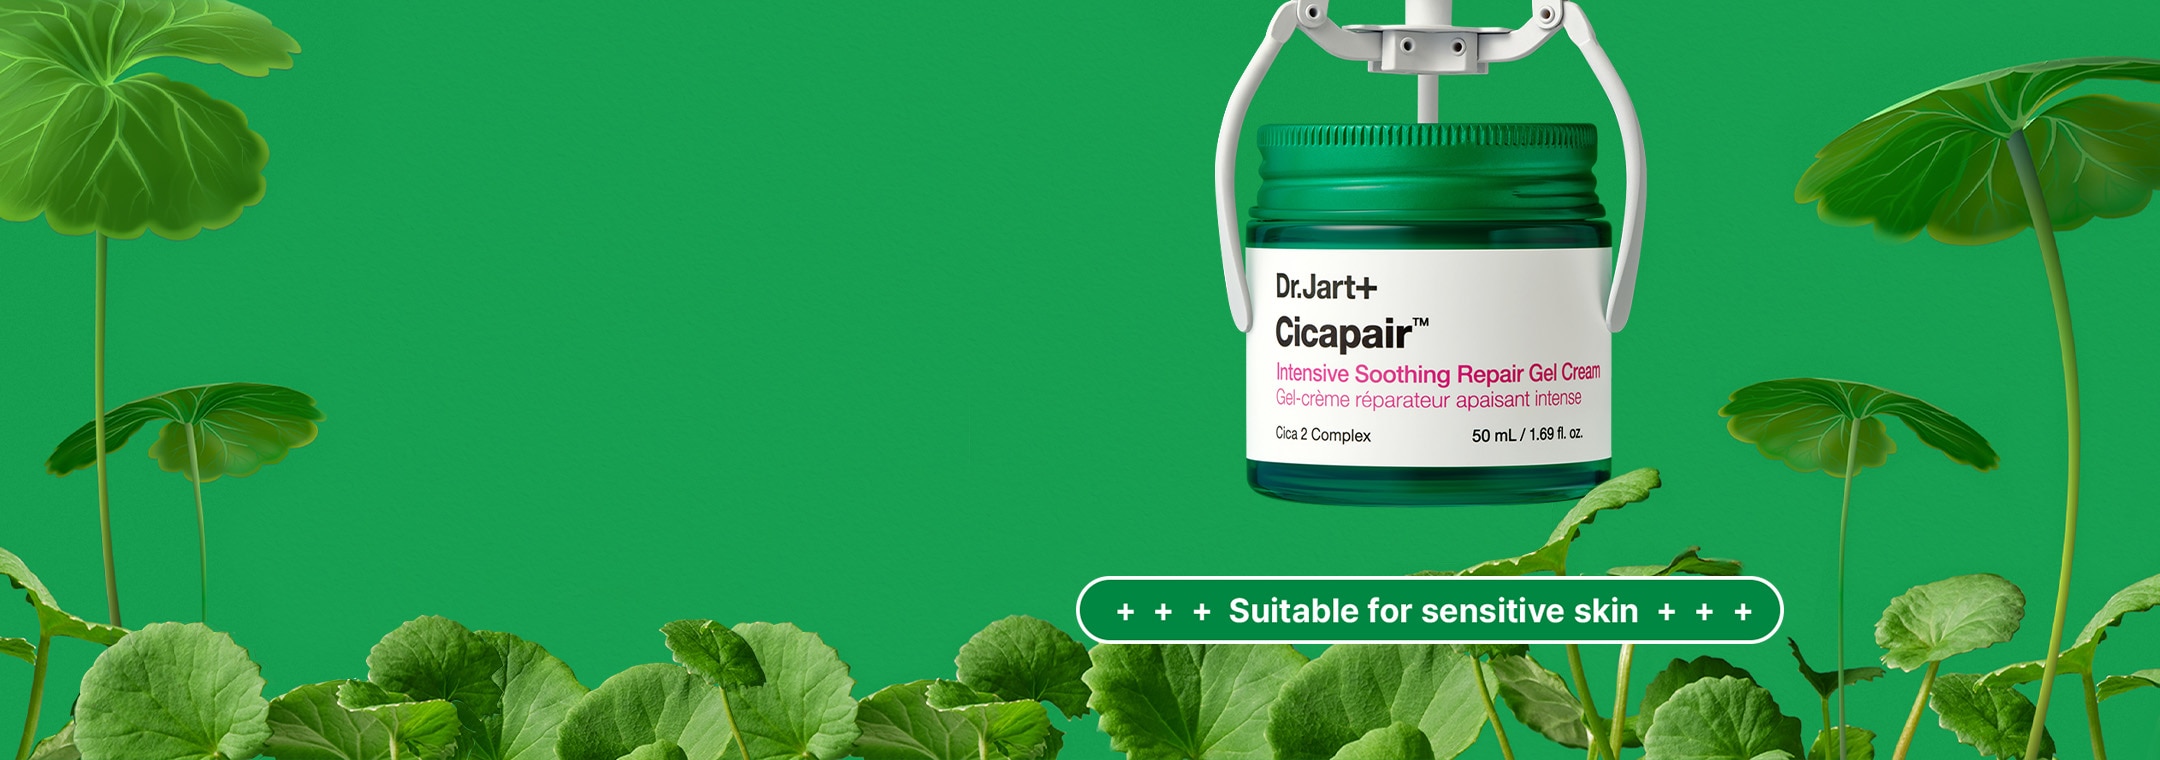  Dr. Jart Cicapair Intensive Soothing Repair Gel Cream with green background and leaves, suitable for sensitive skin